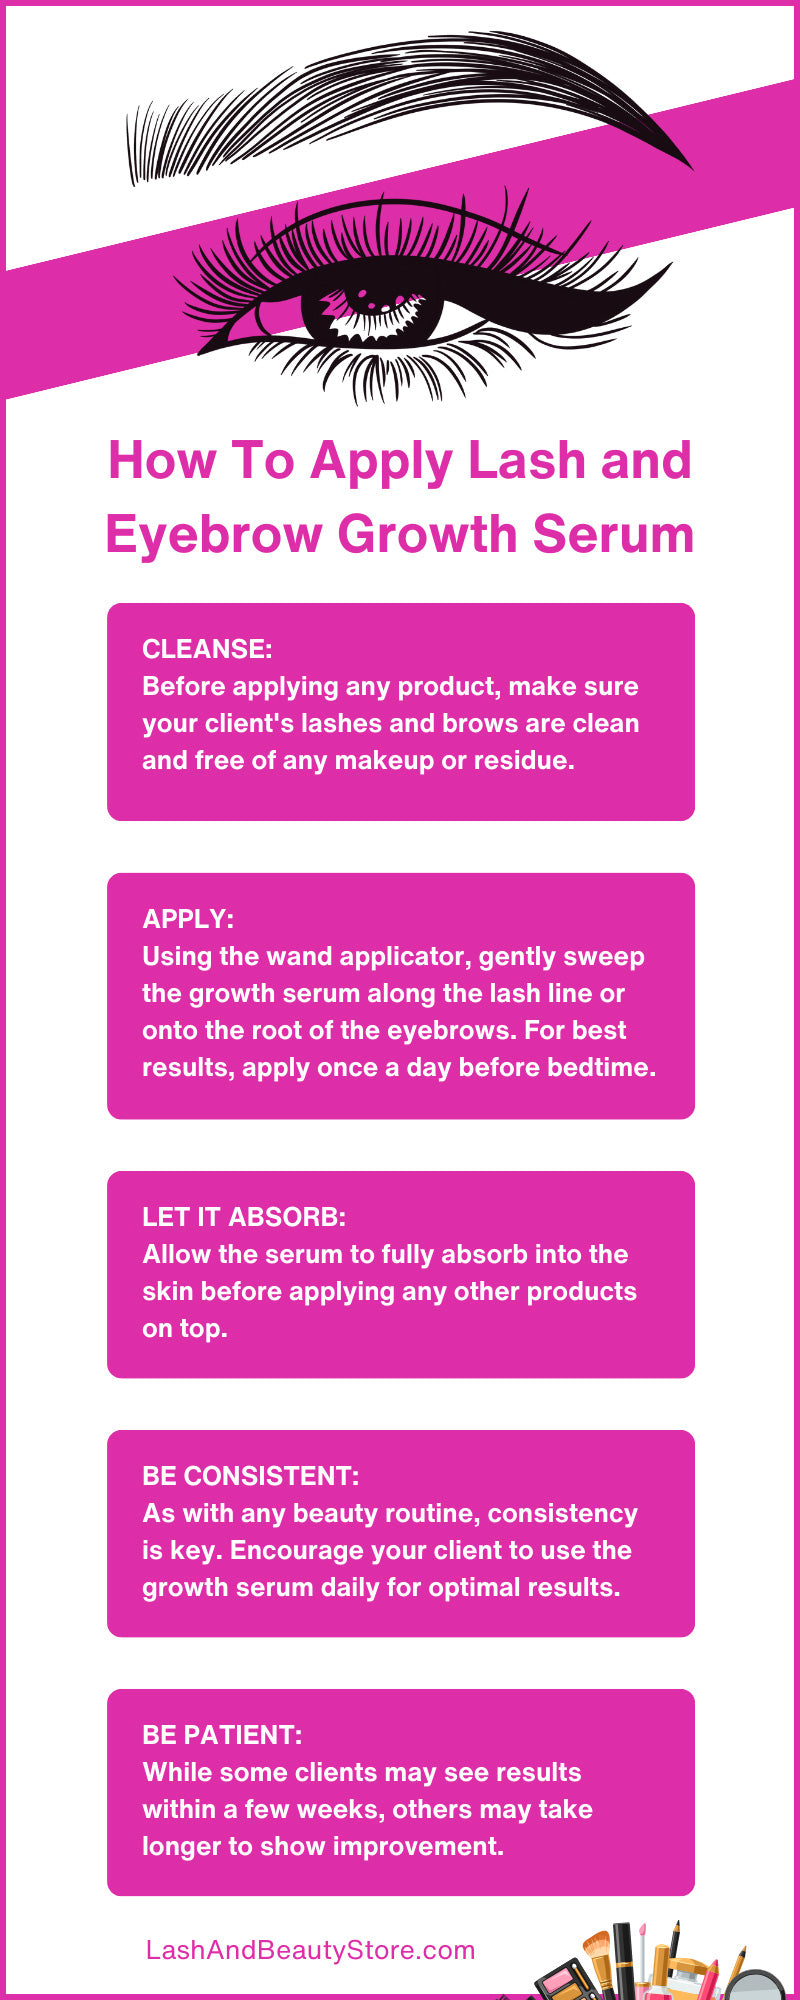 How To Apply Lash and Eyebrow Growth Serum